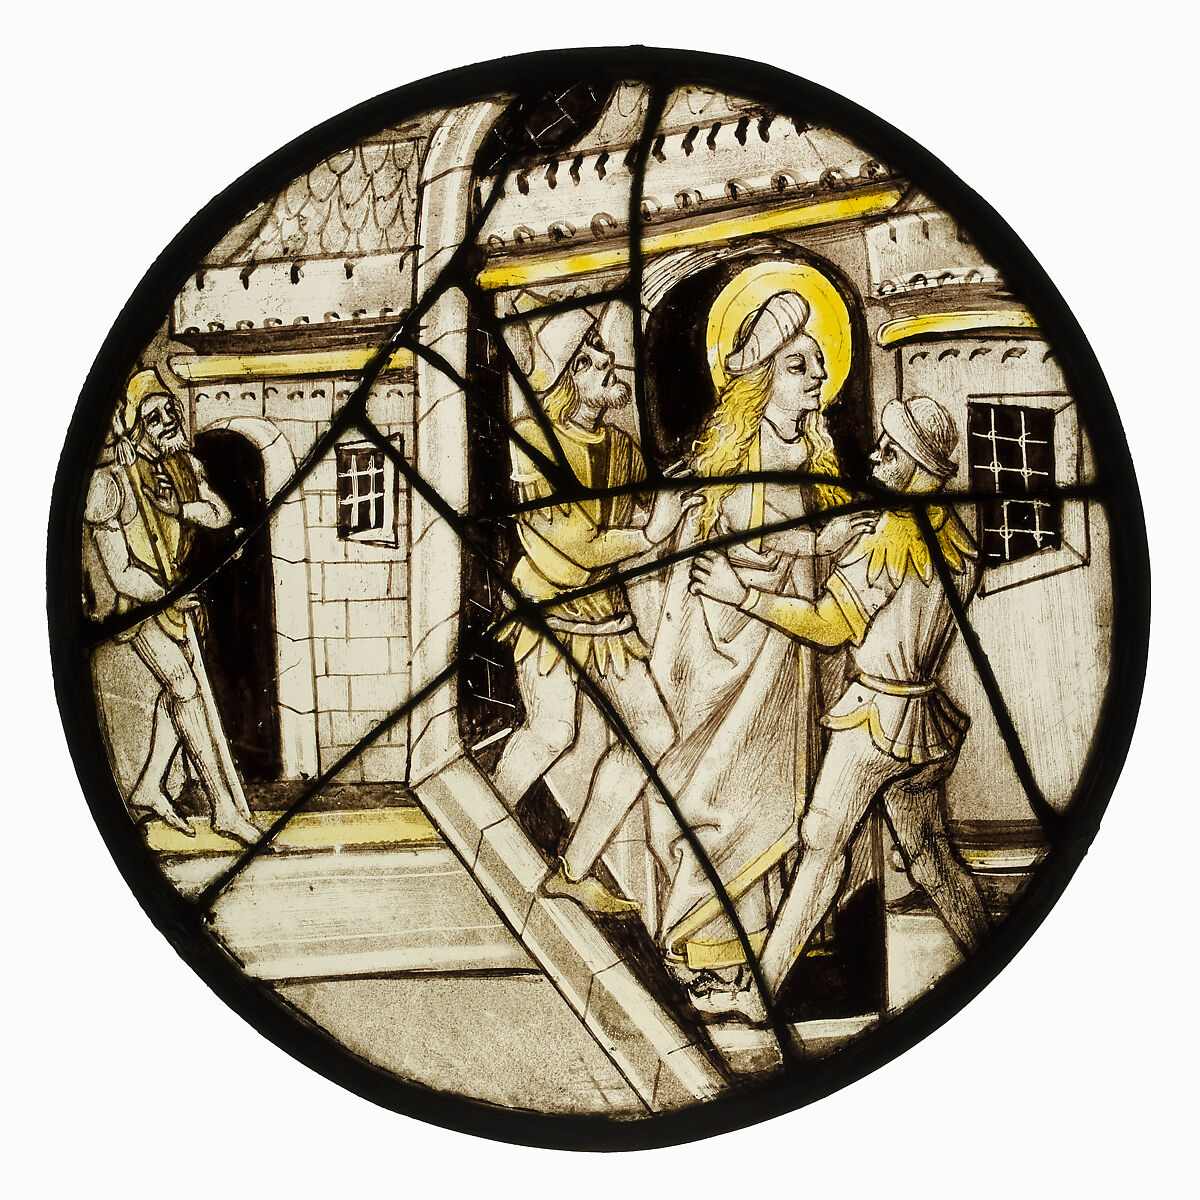 Roundel with Saint  Barbara or Saint Catherine Thrown into Prison, Colorless glass, silver stain, vitreous paint, German 